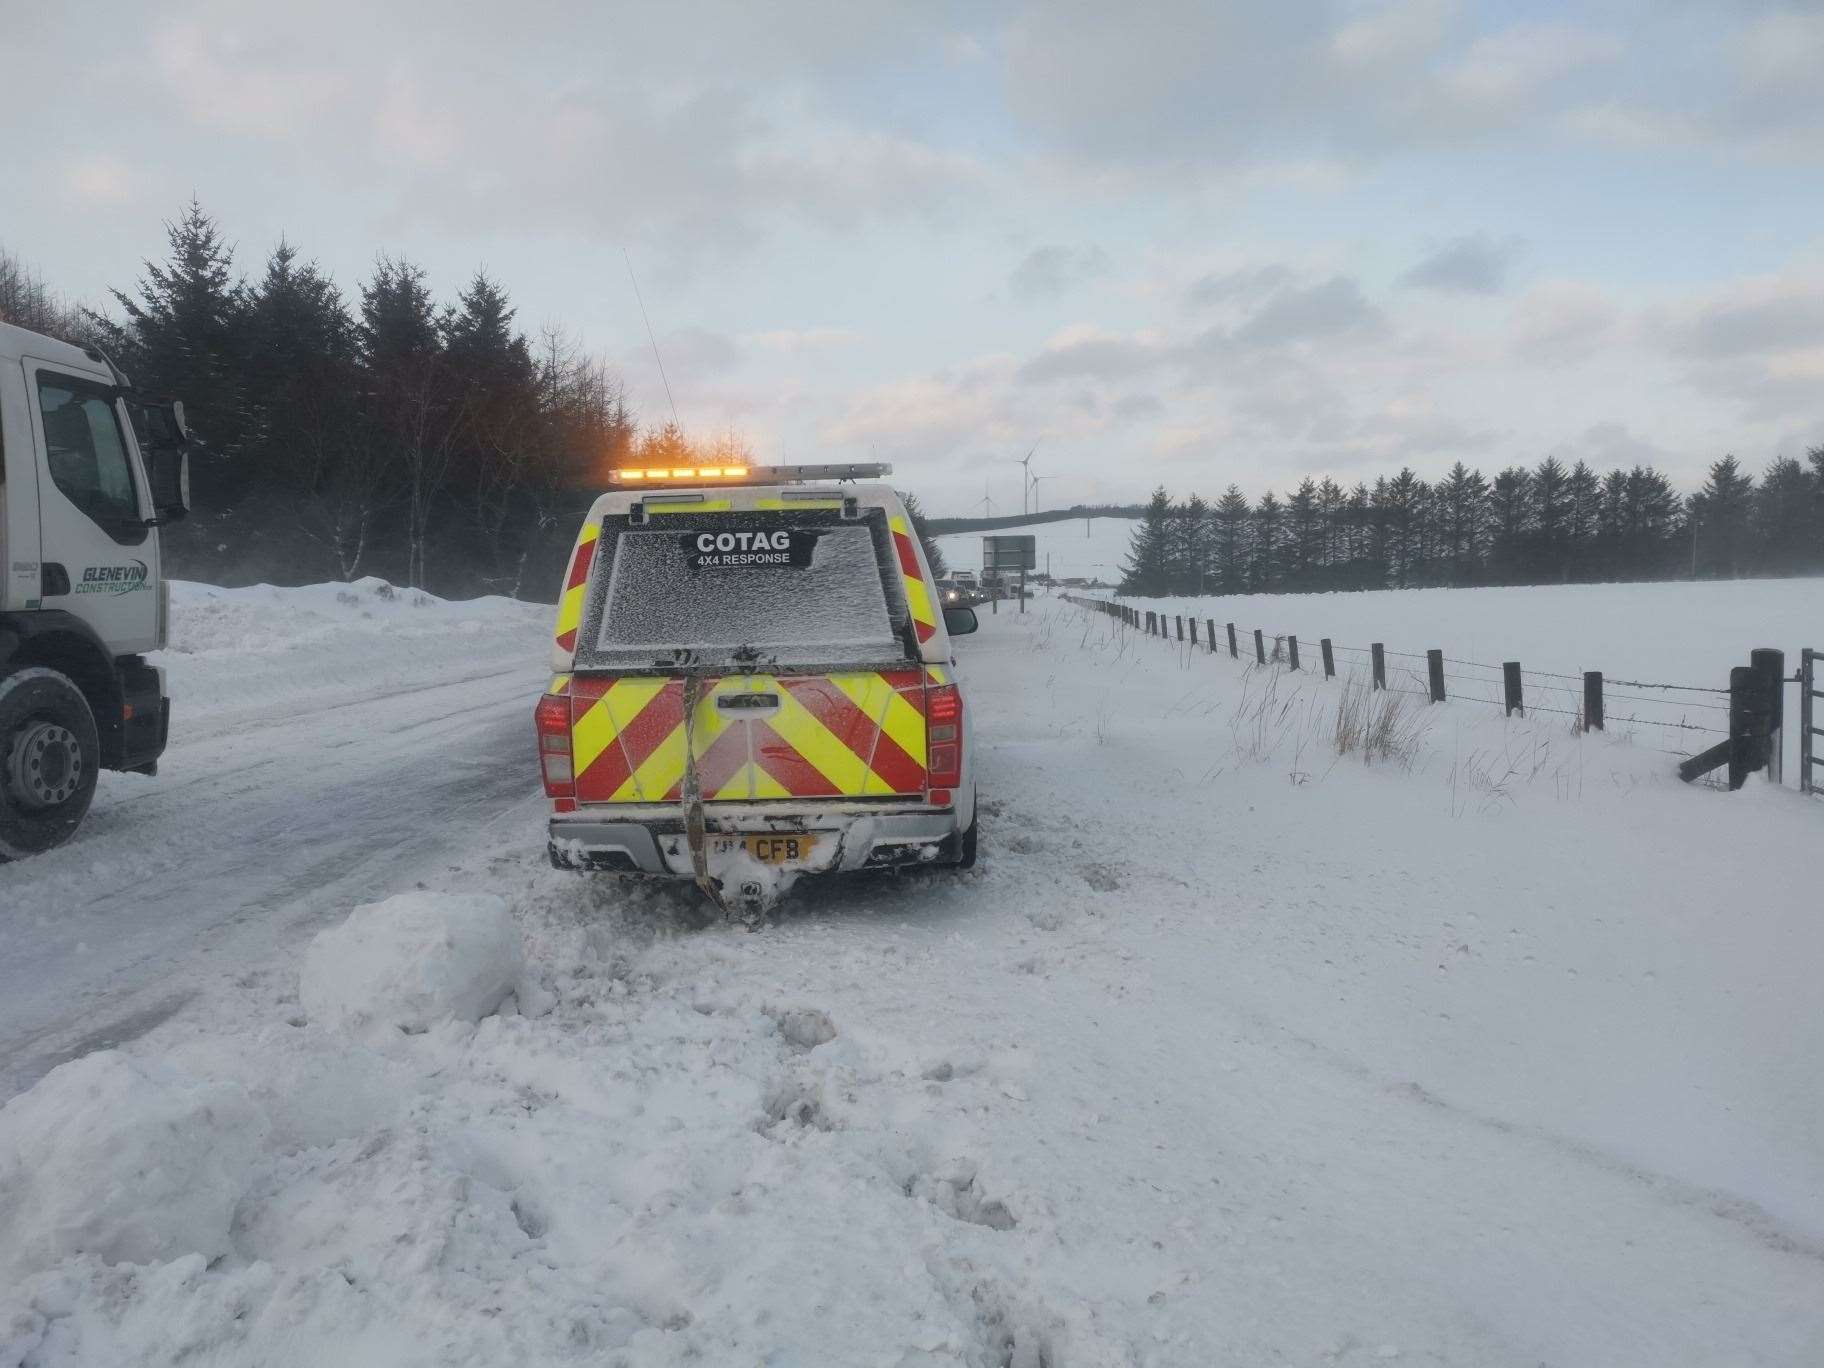 Some of the scenes on the A96 in February following blizzard conditions.